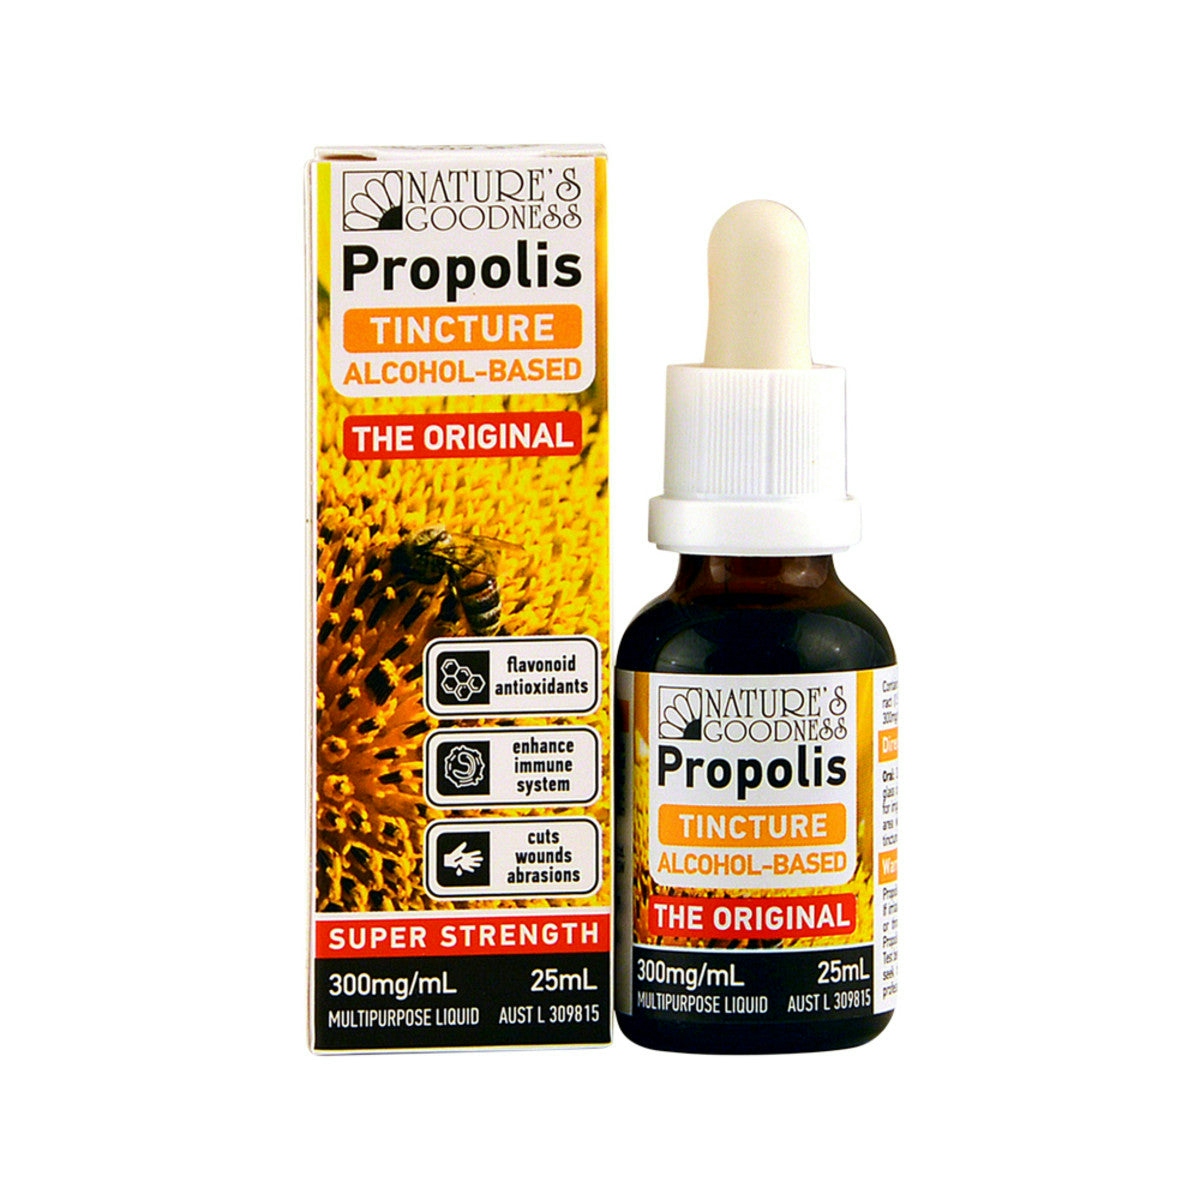 image of Nature's Goodness Propolis Tincture (The Original) Super Strength 300mg/ml 25ml on white background 